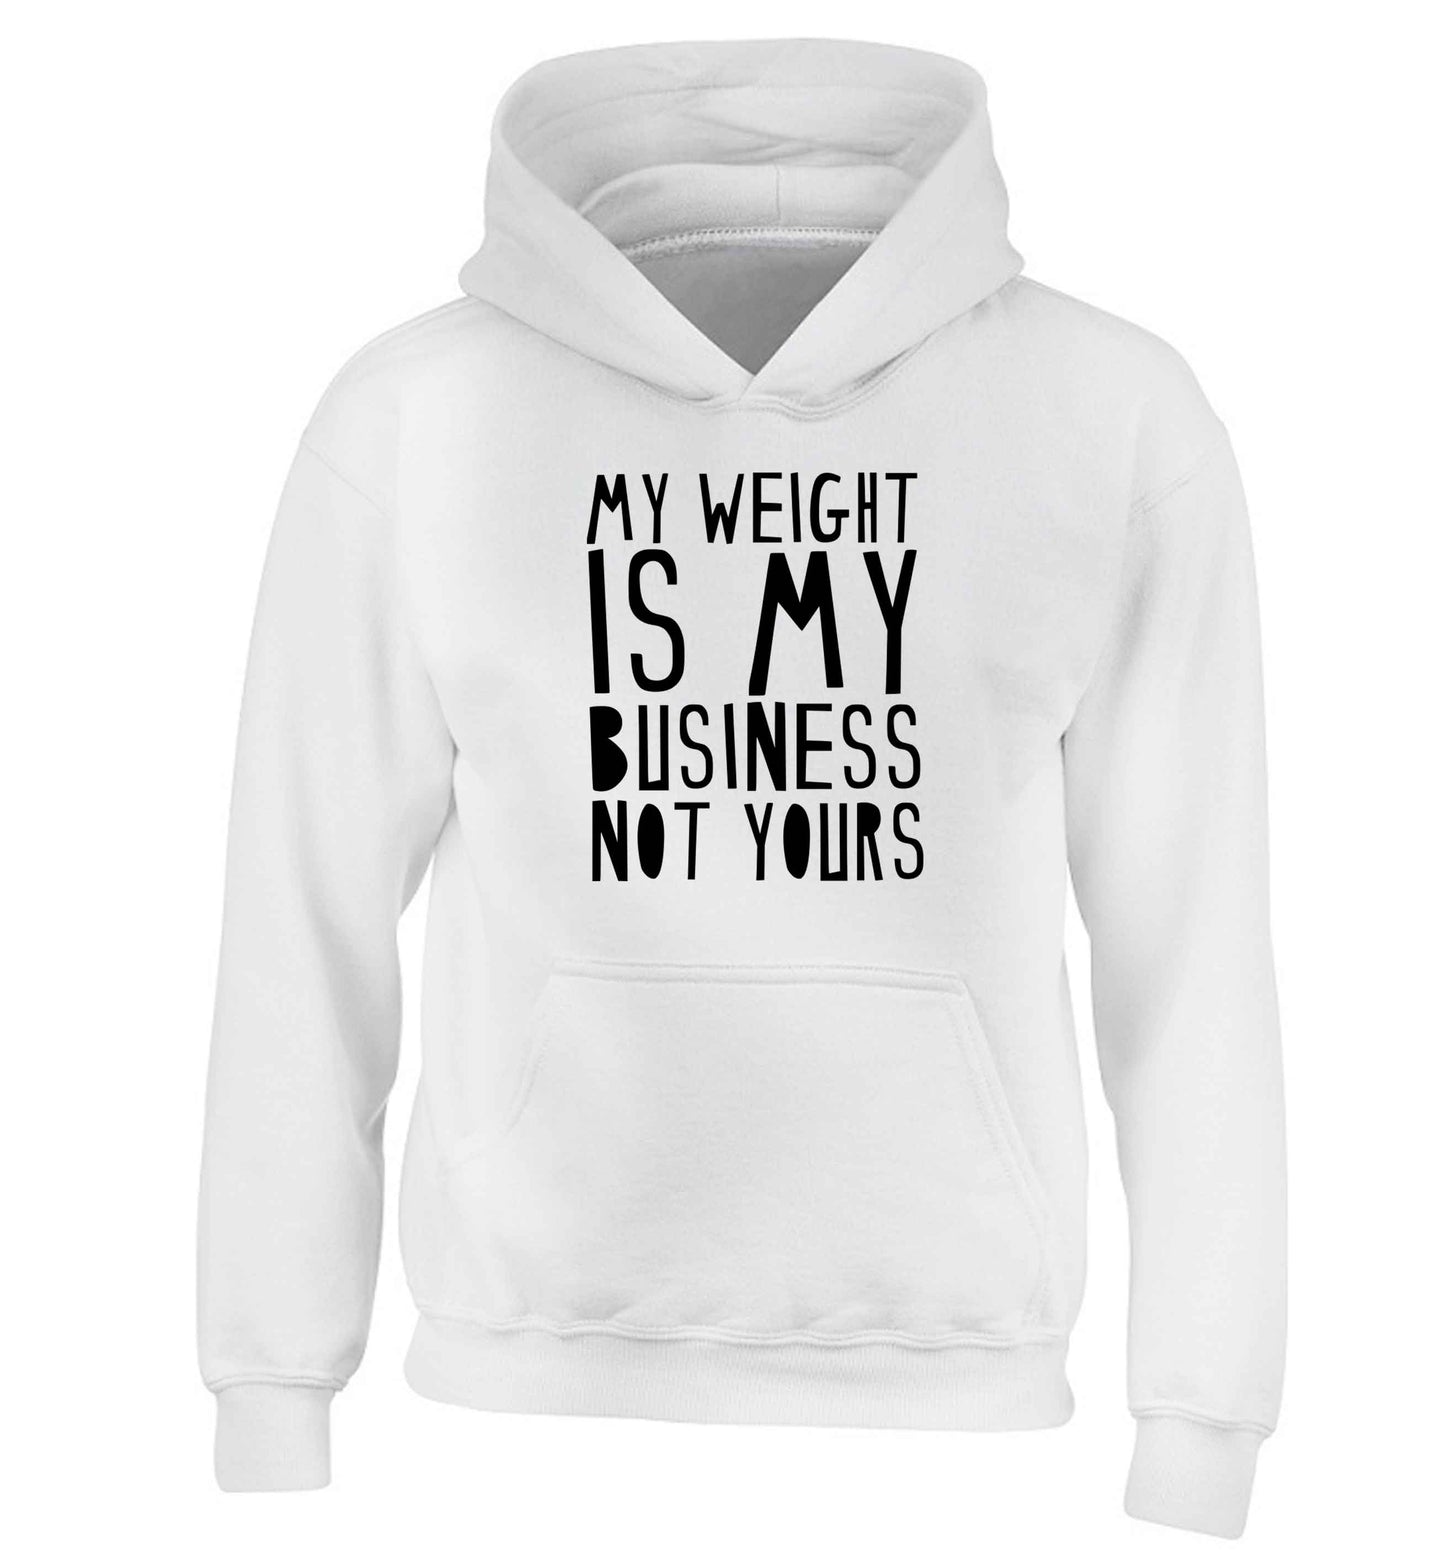 My weight is my business not yours children's white hoodie 12-13 Years